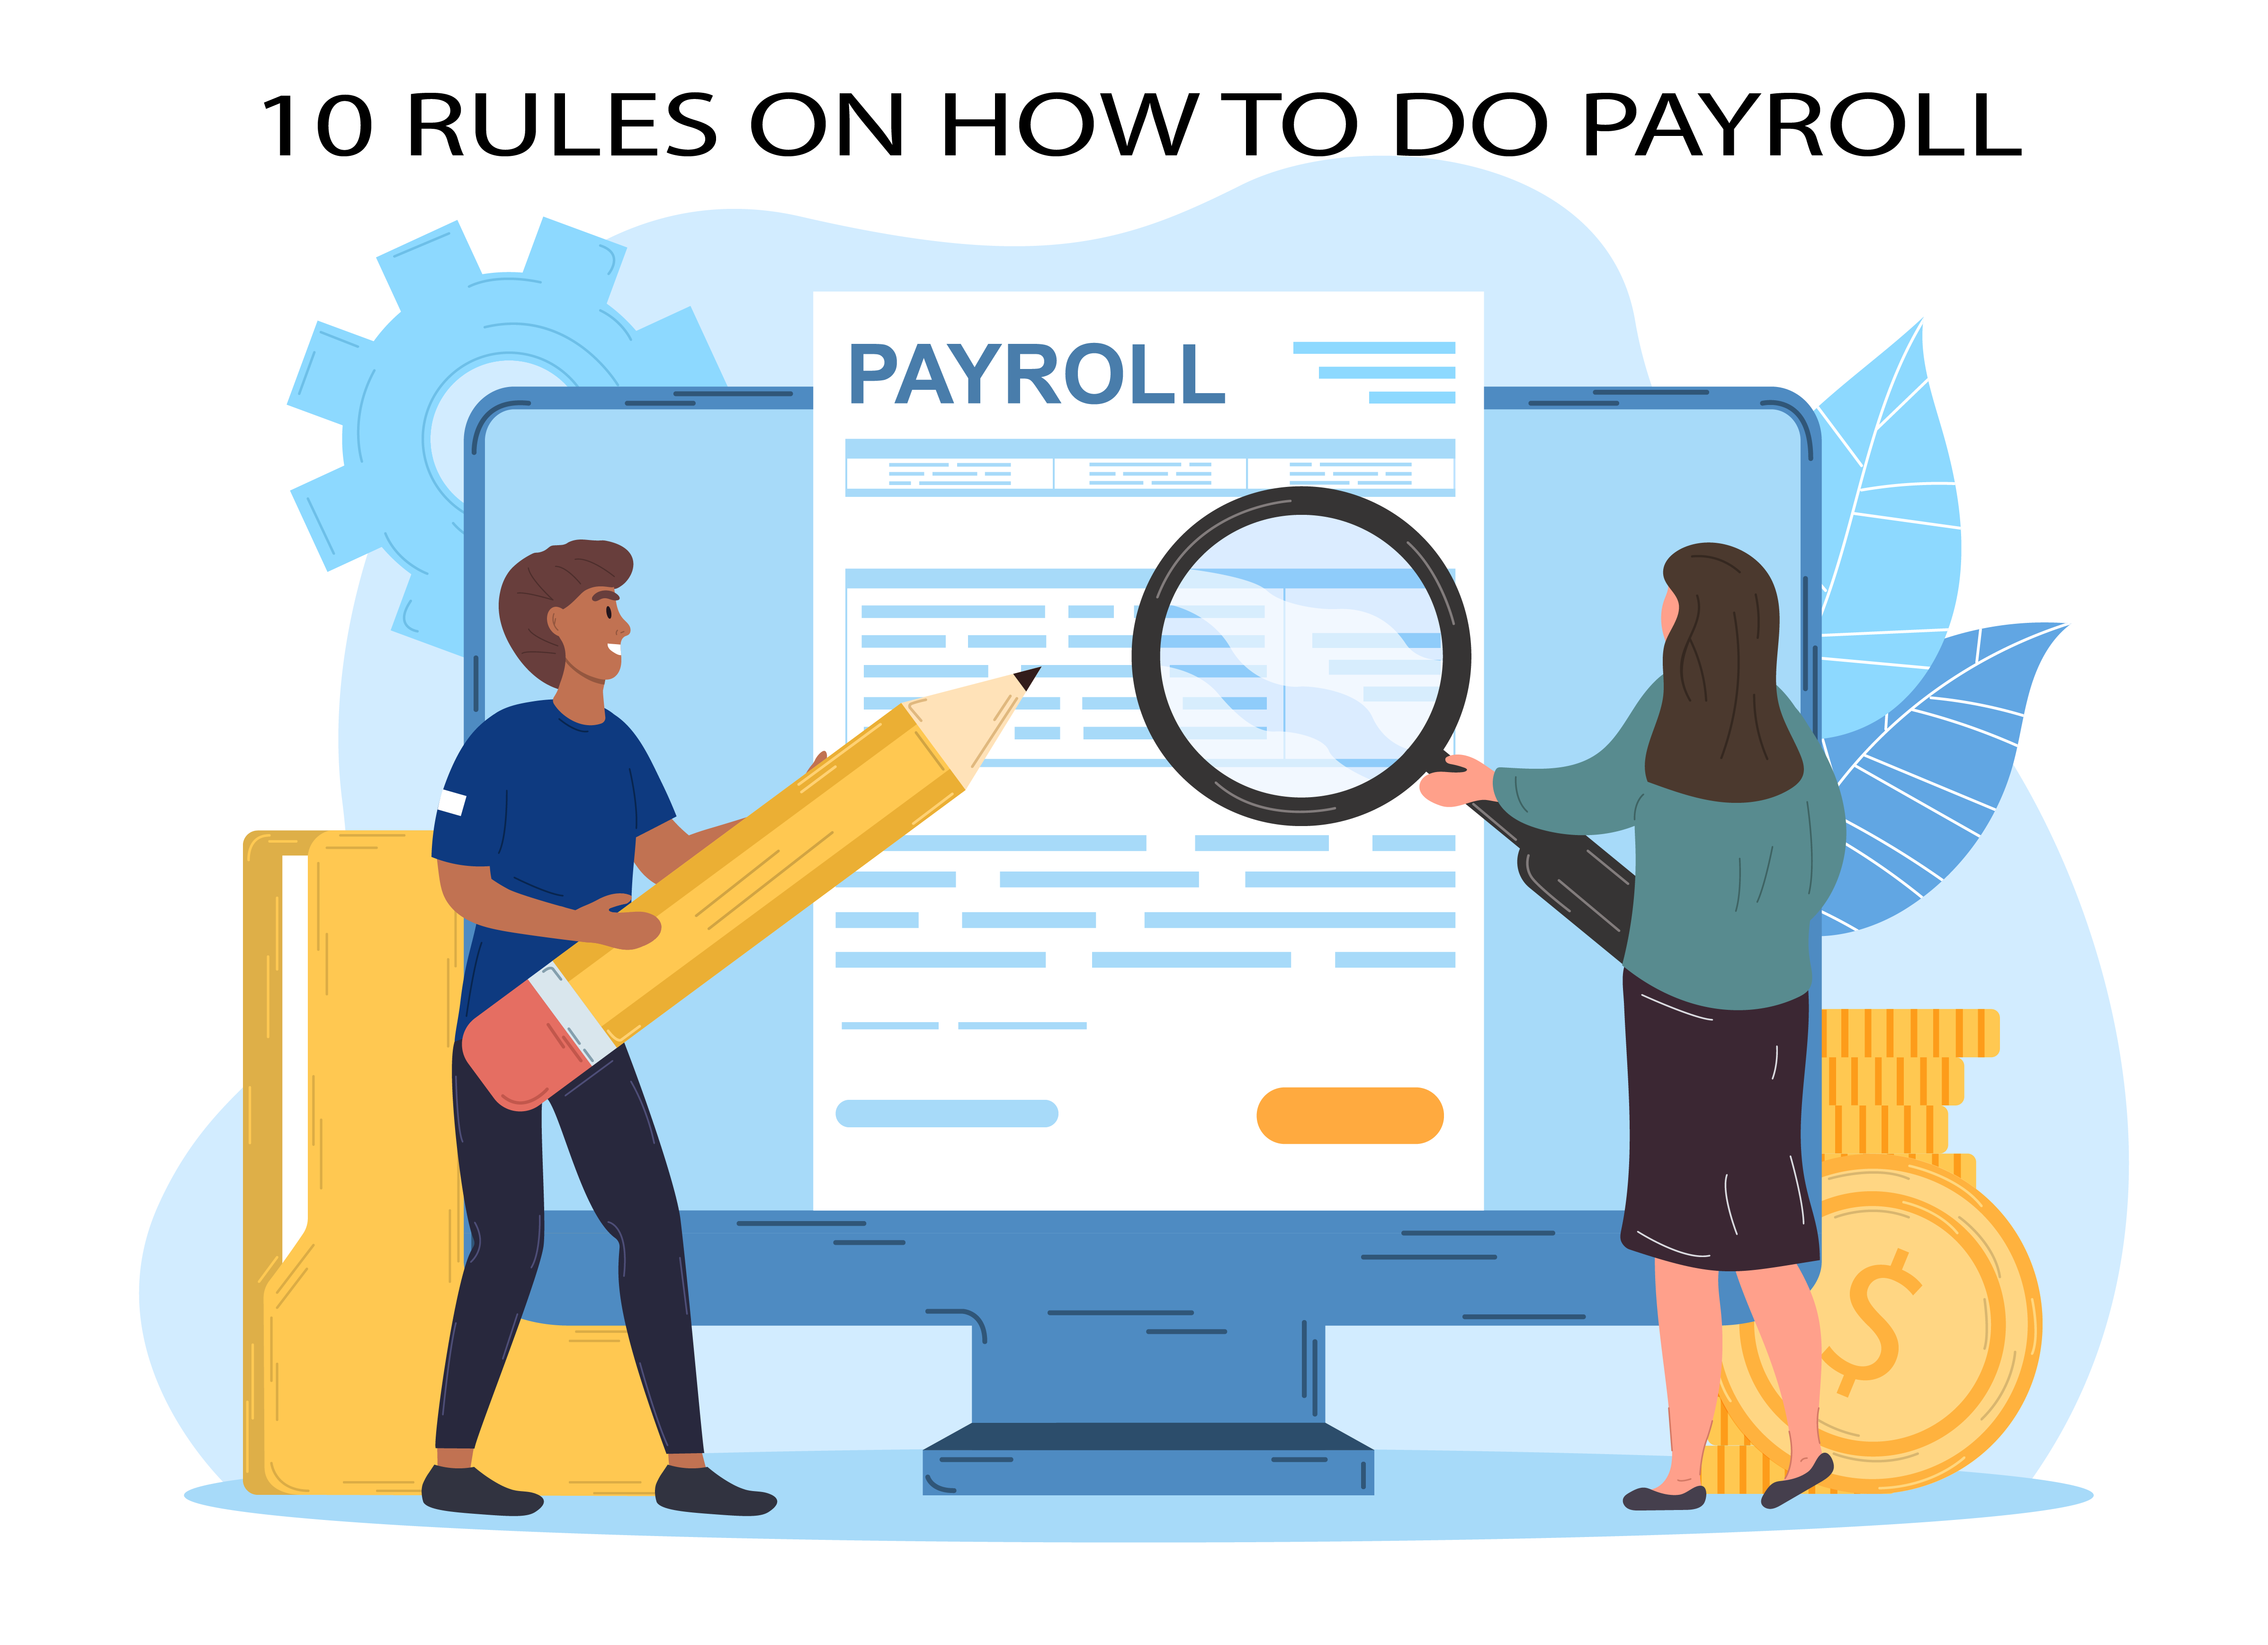 10 rules on how to do payroll